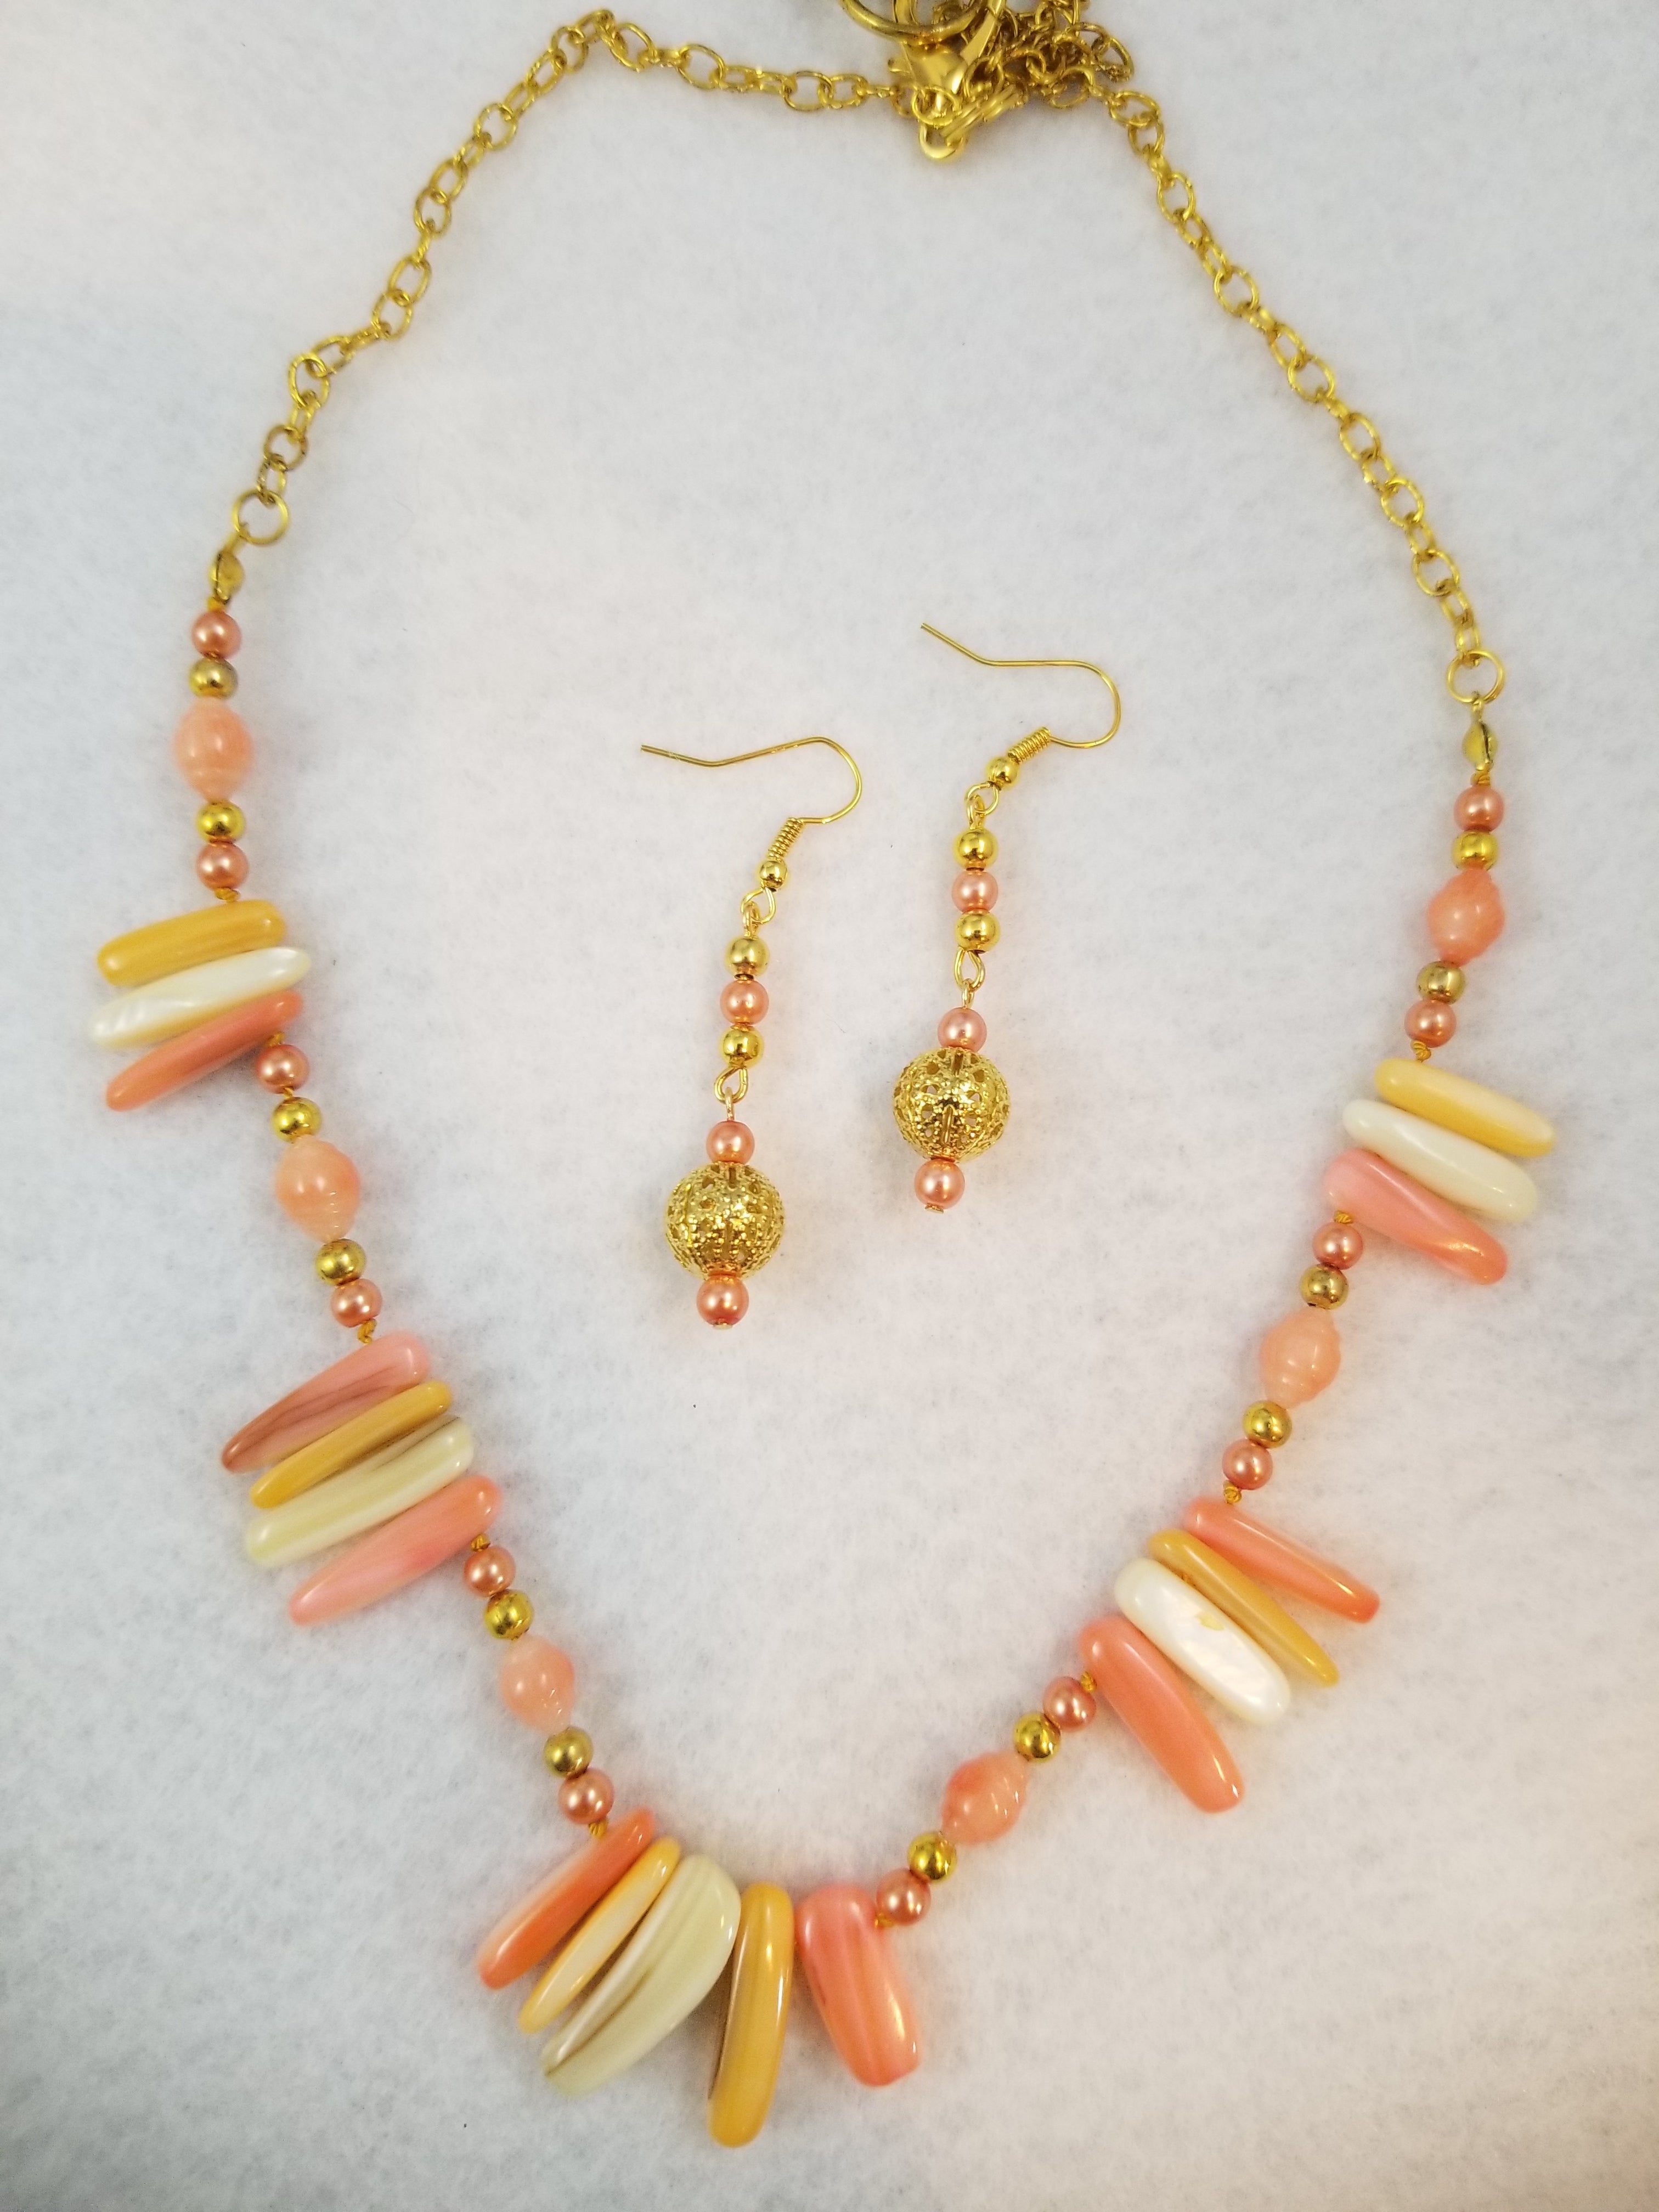 Summer Peach Necklace with Earrings